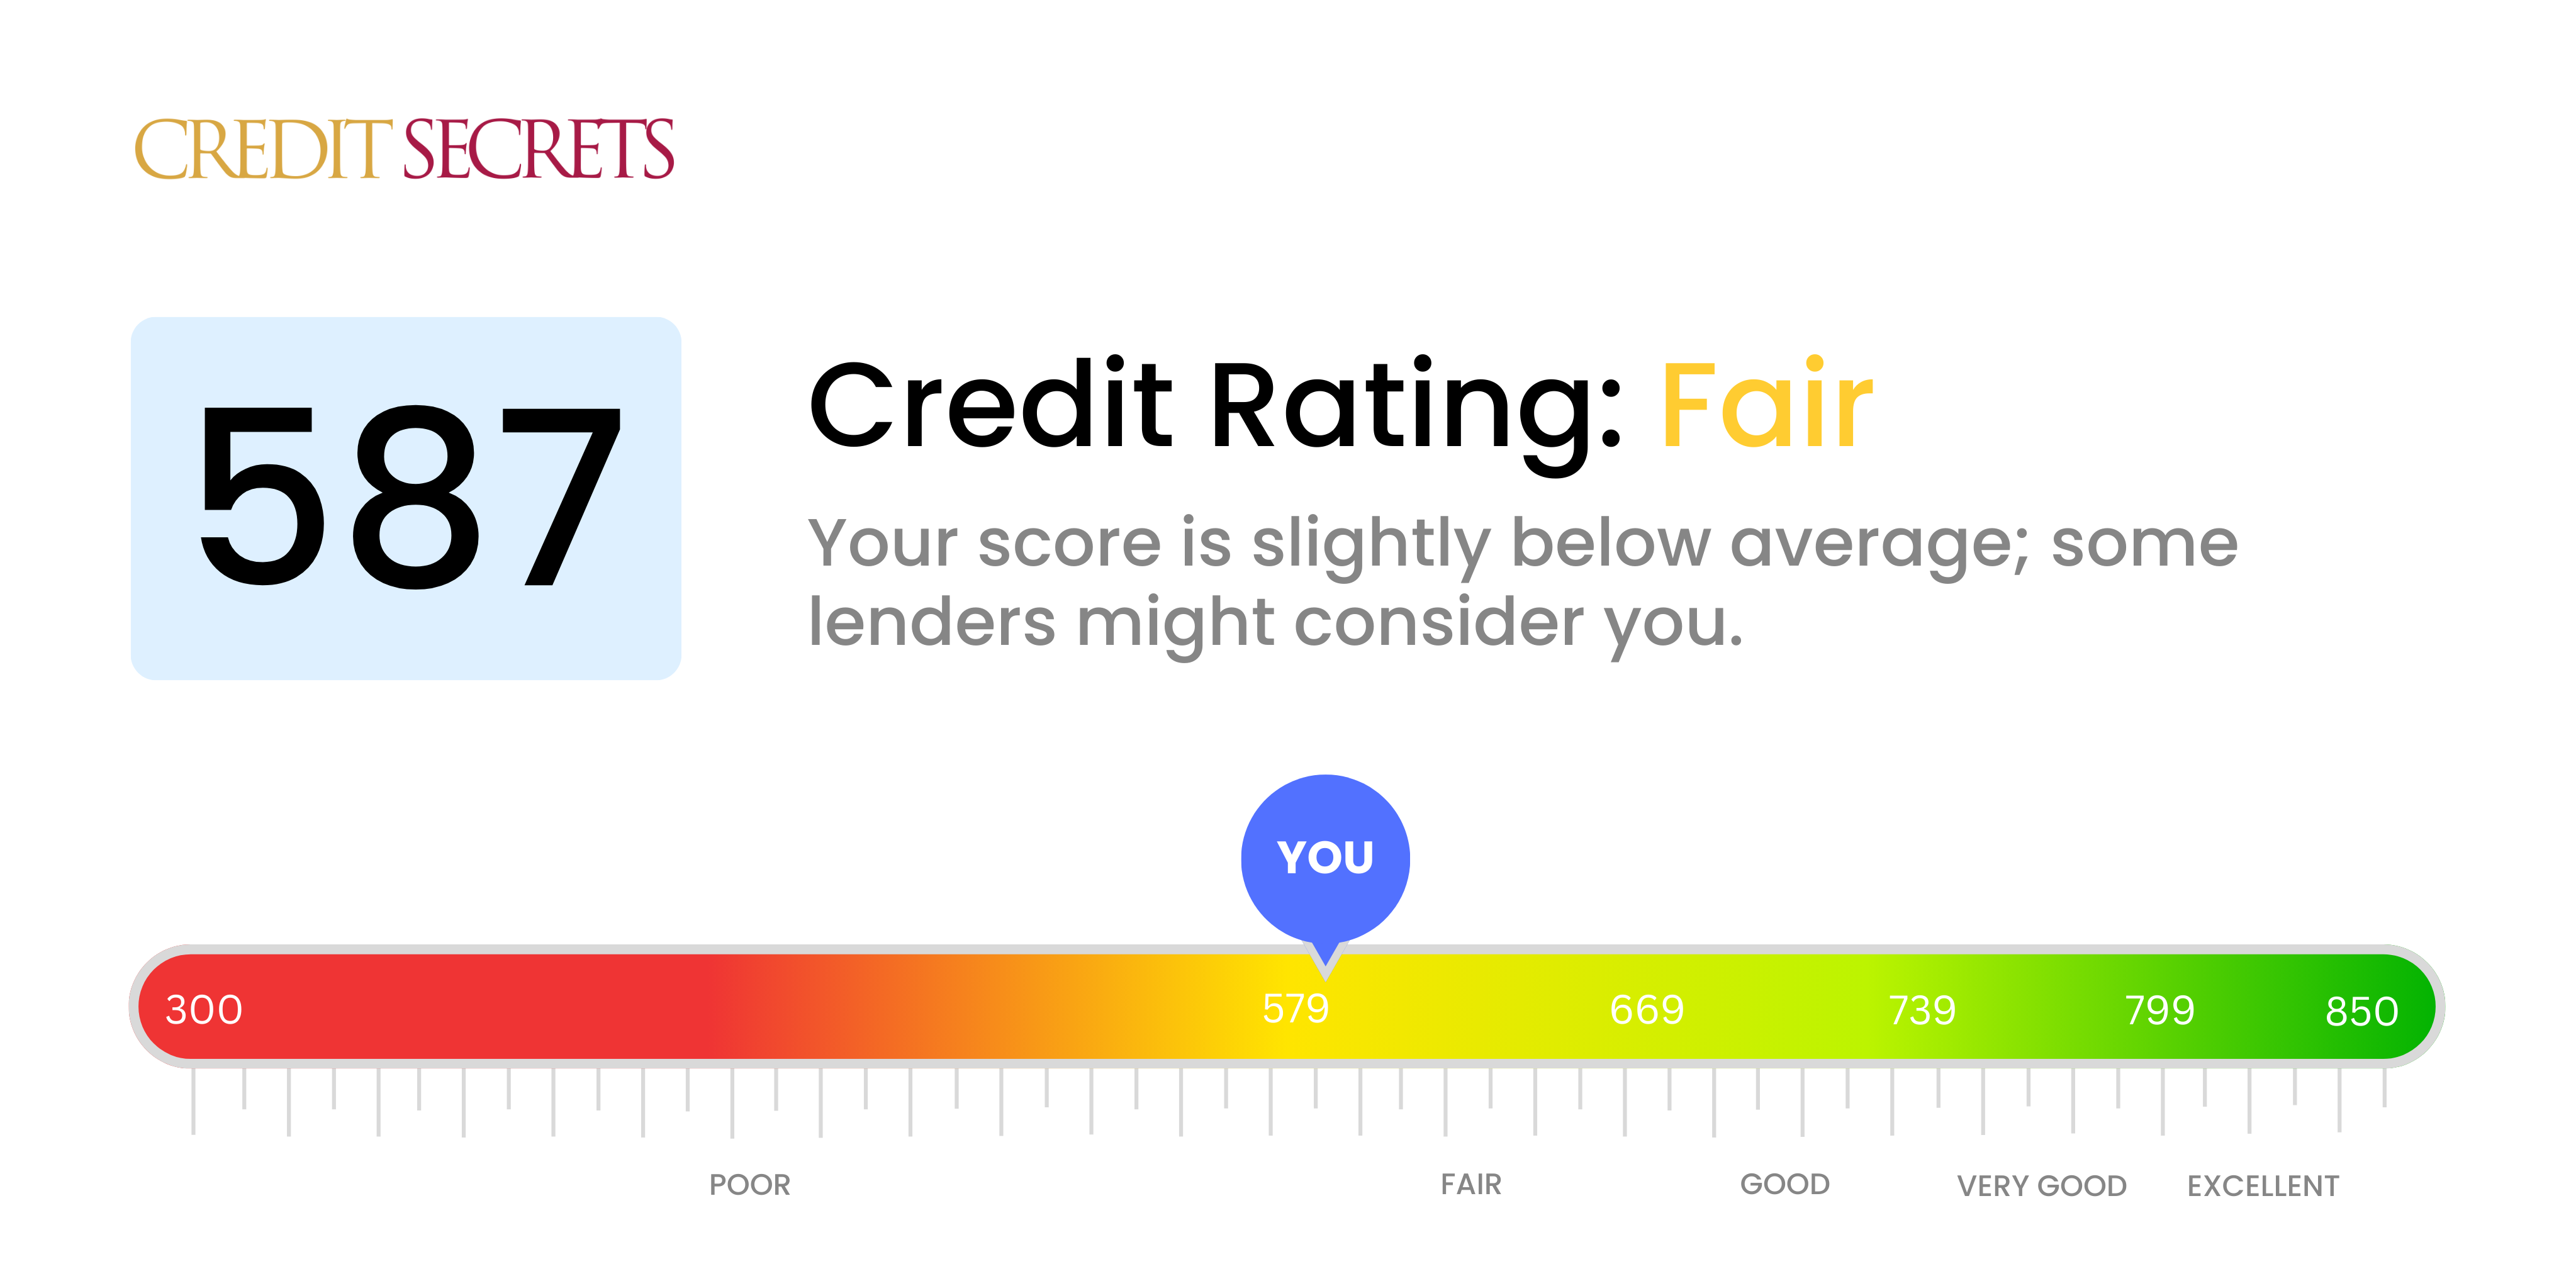 Is 587 a good credit score?